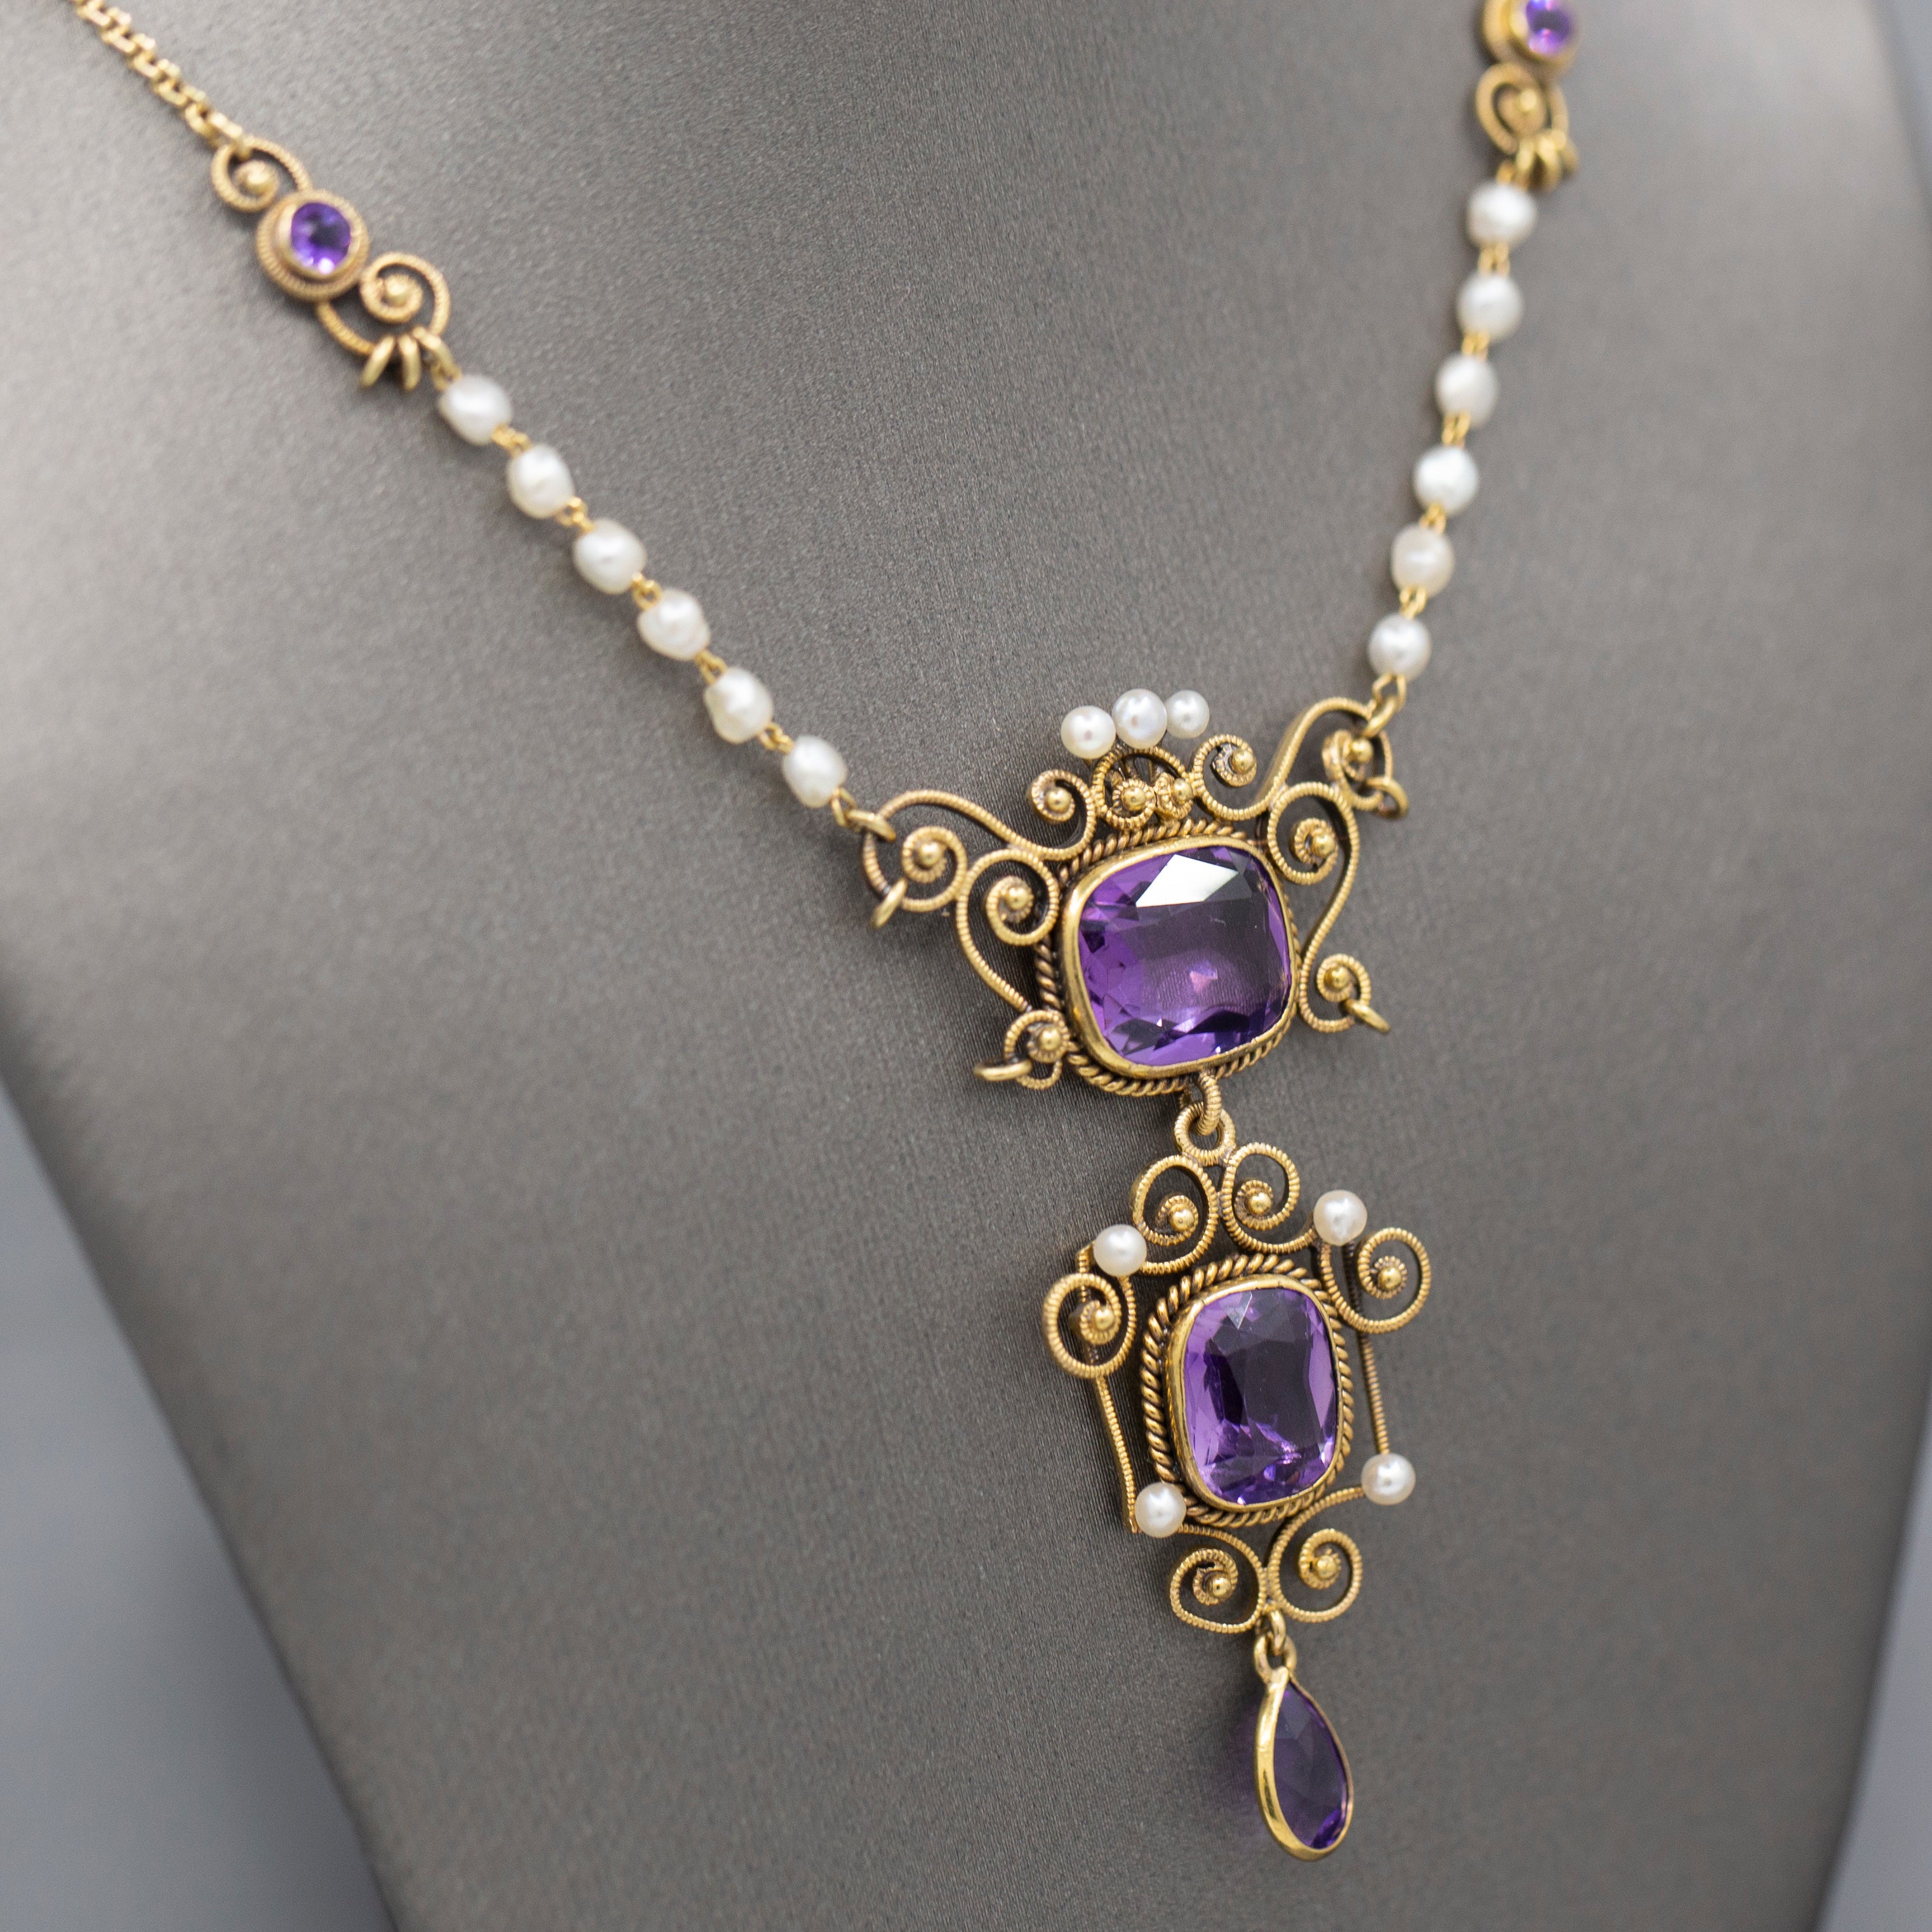 Antique Victorian Amethyst and Seed Pearl Pendant Necklace in 14k Yellow Gold